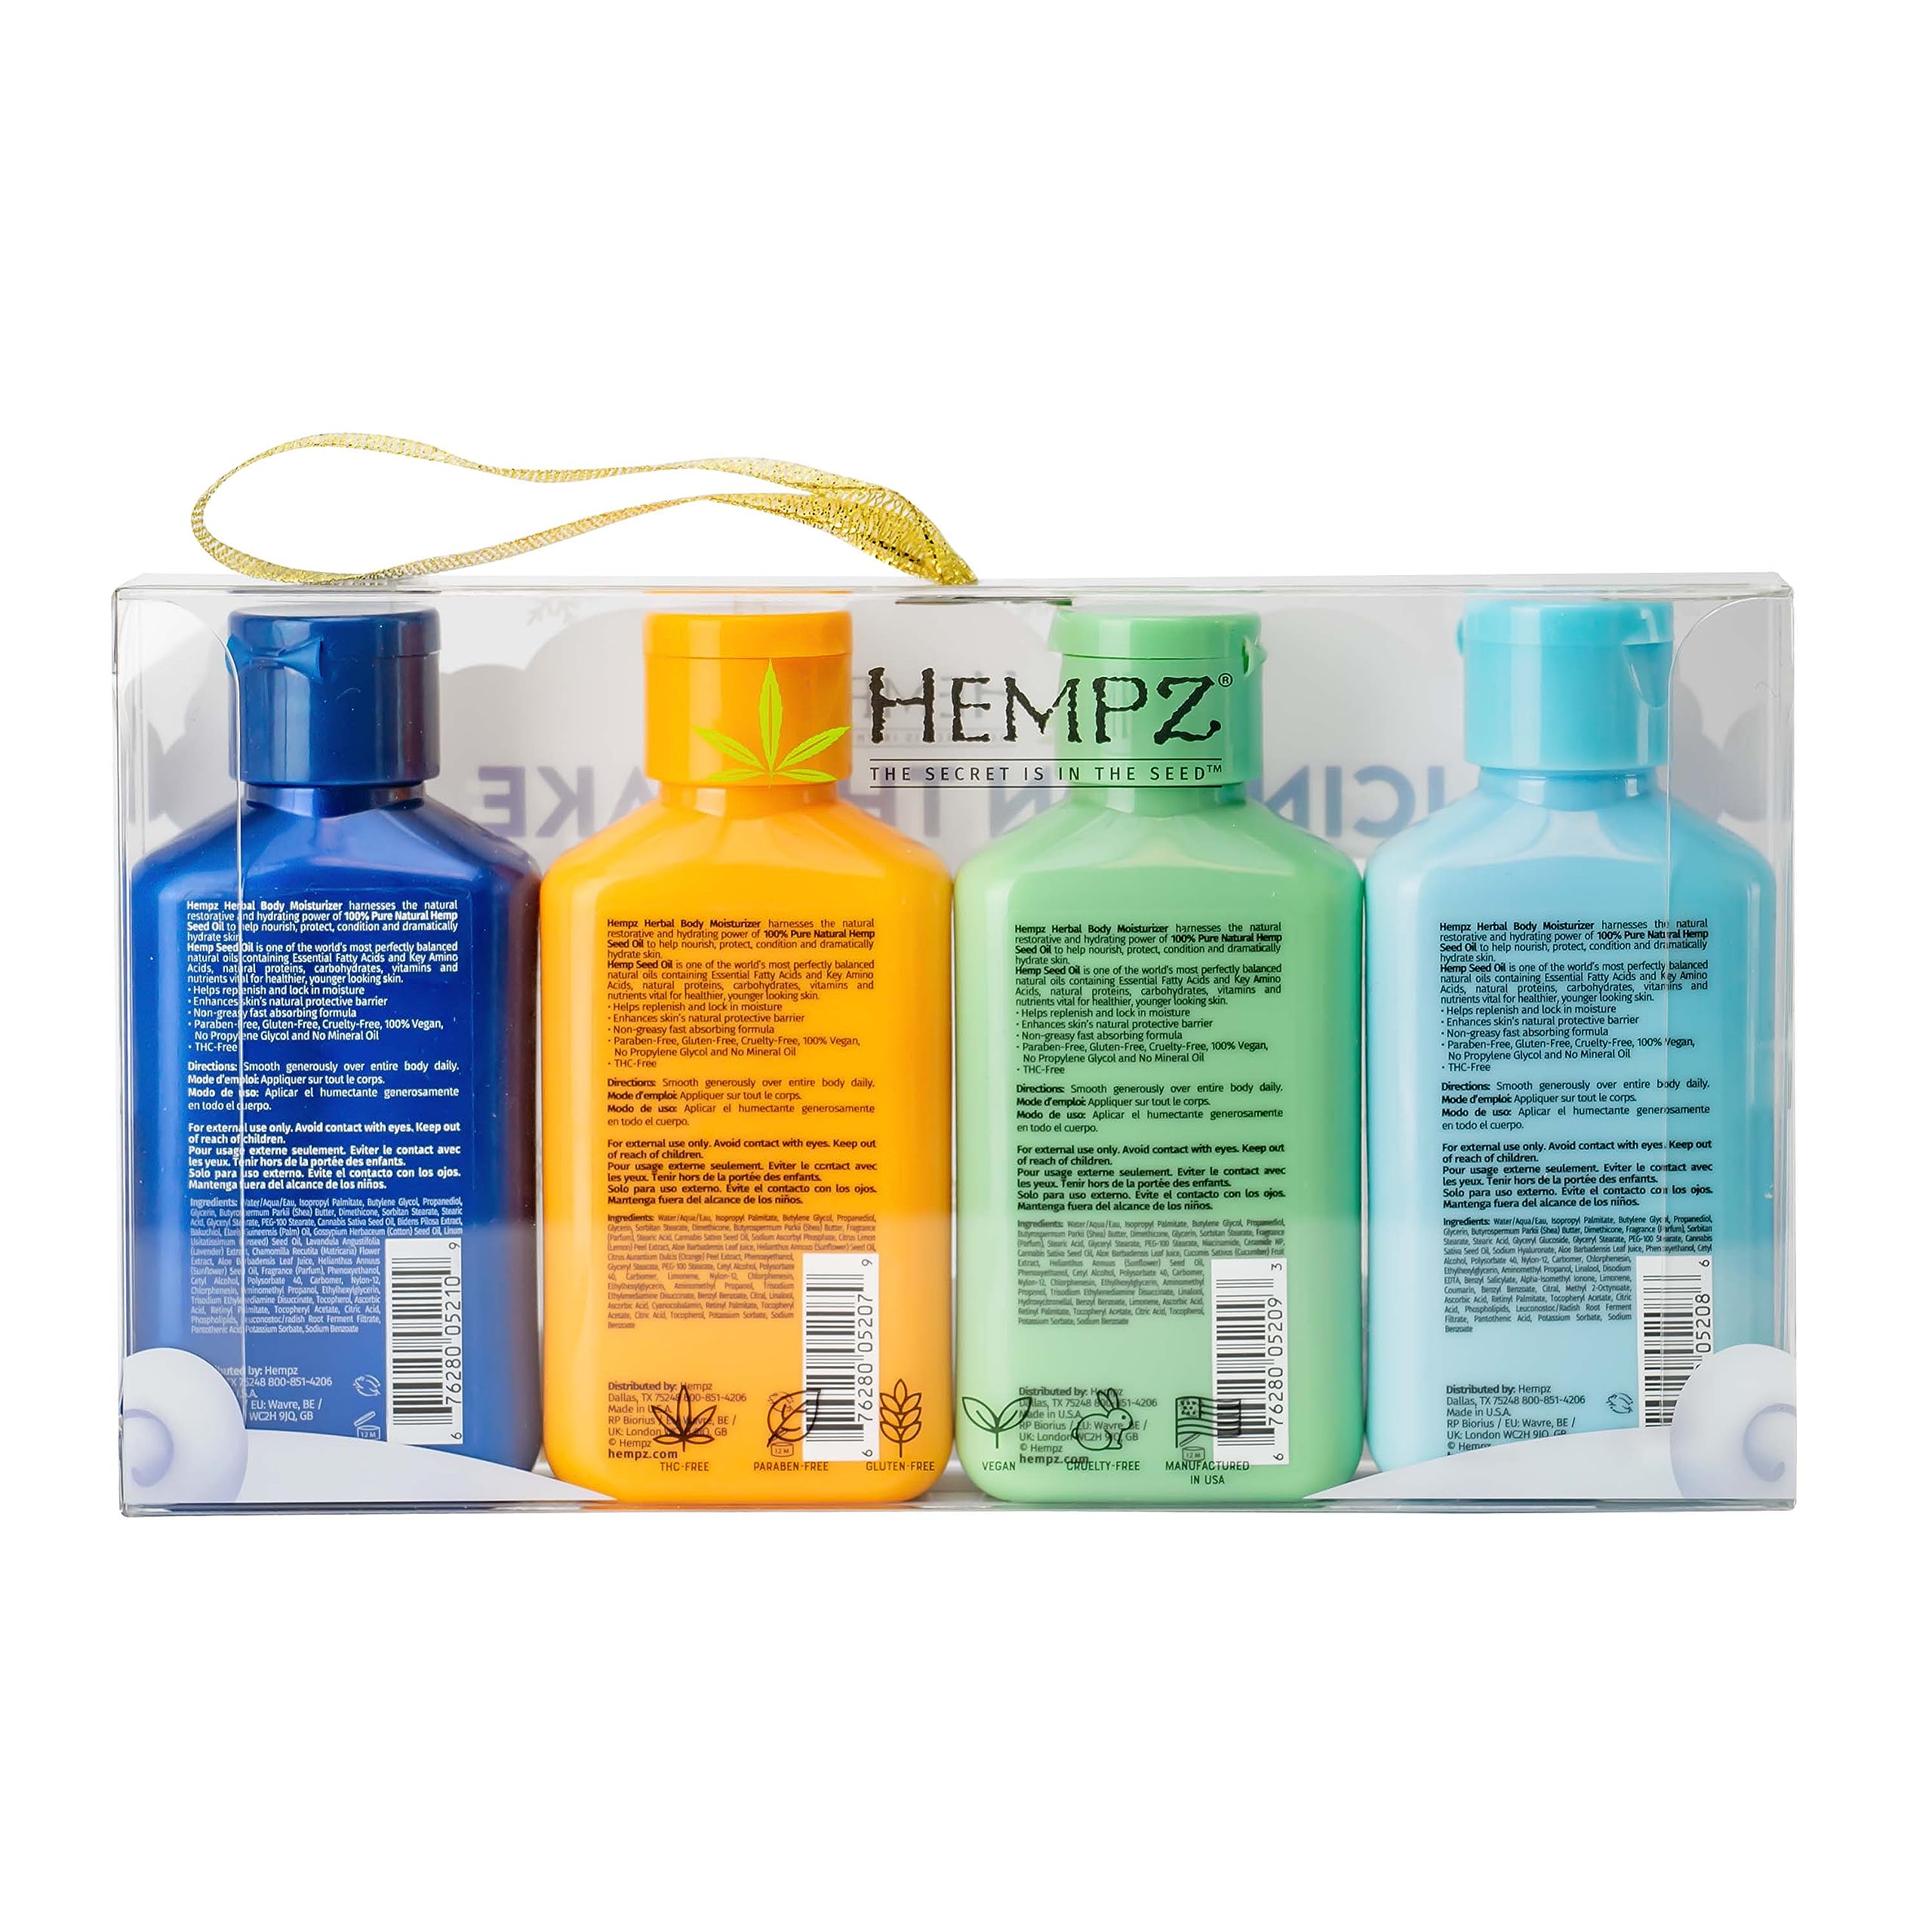 Hempz Icing on the Cake Ocean Breeze, Cucumber & Aloe, Citrus Blossom, Lavender & Chamomile Moisturizer (2.25 Oz 4 Pack) – Holiday Mini Travel Body Lotion for Women or Men with Dry or Sensitive Skin